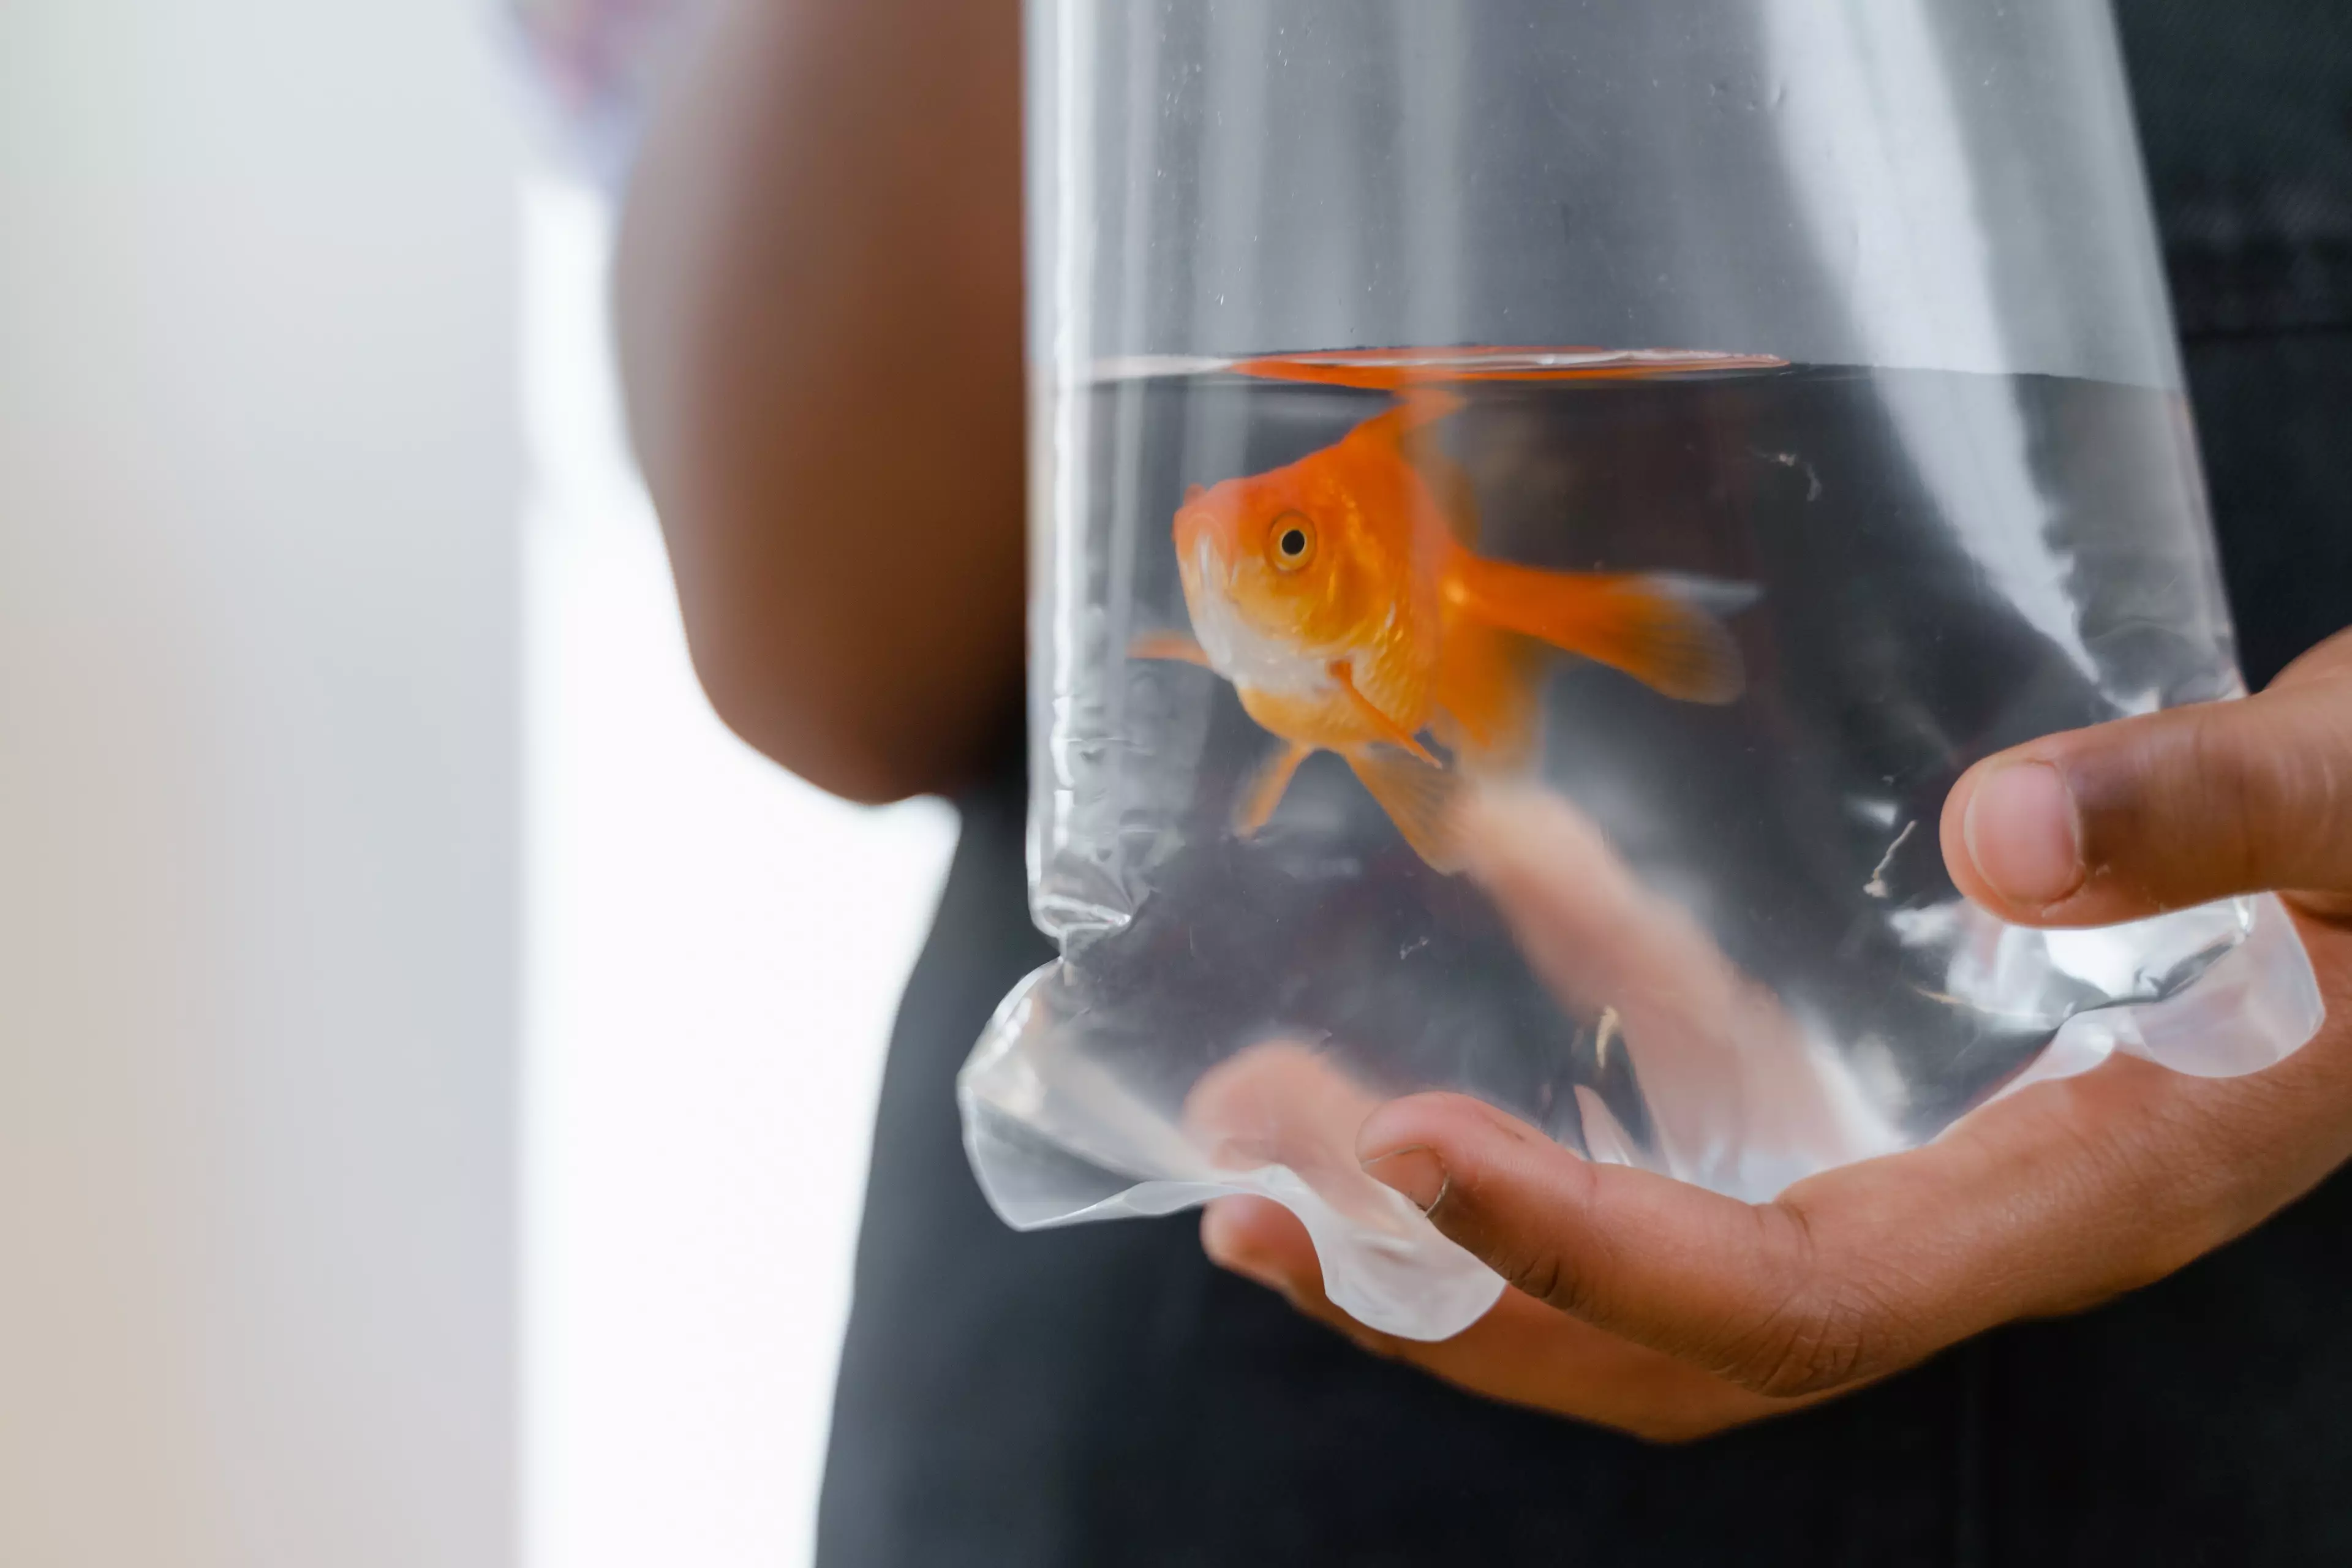 Many goldfish die 'within hours'.